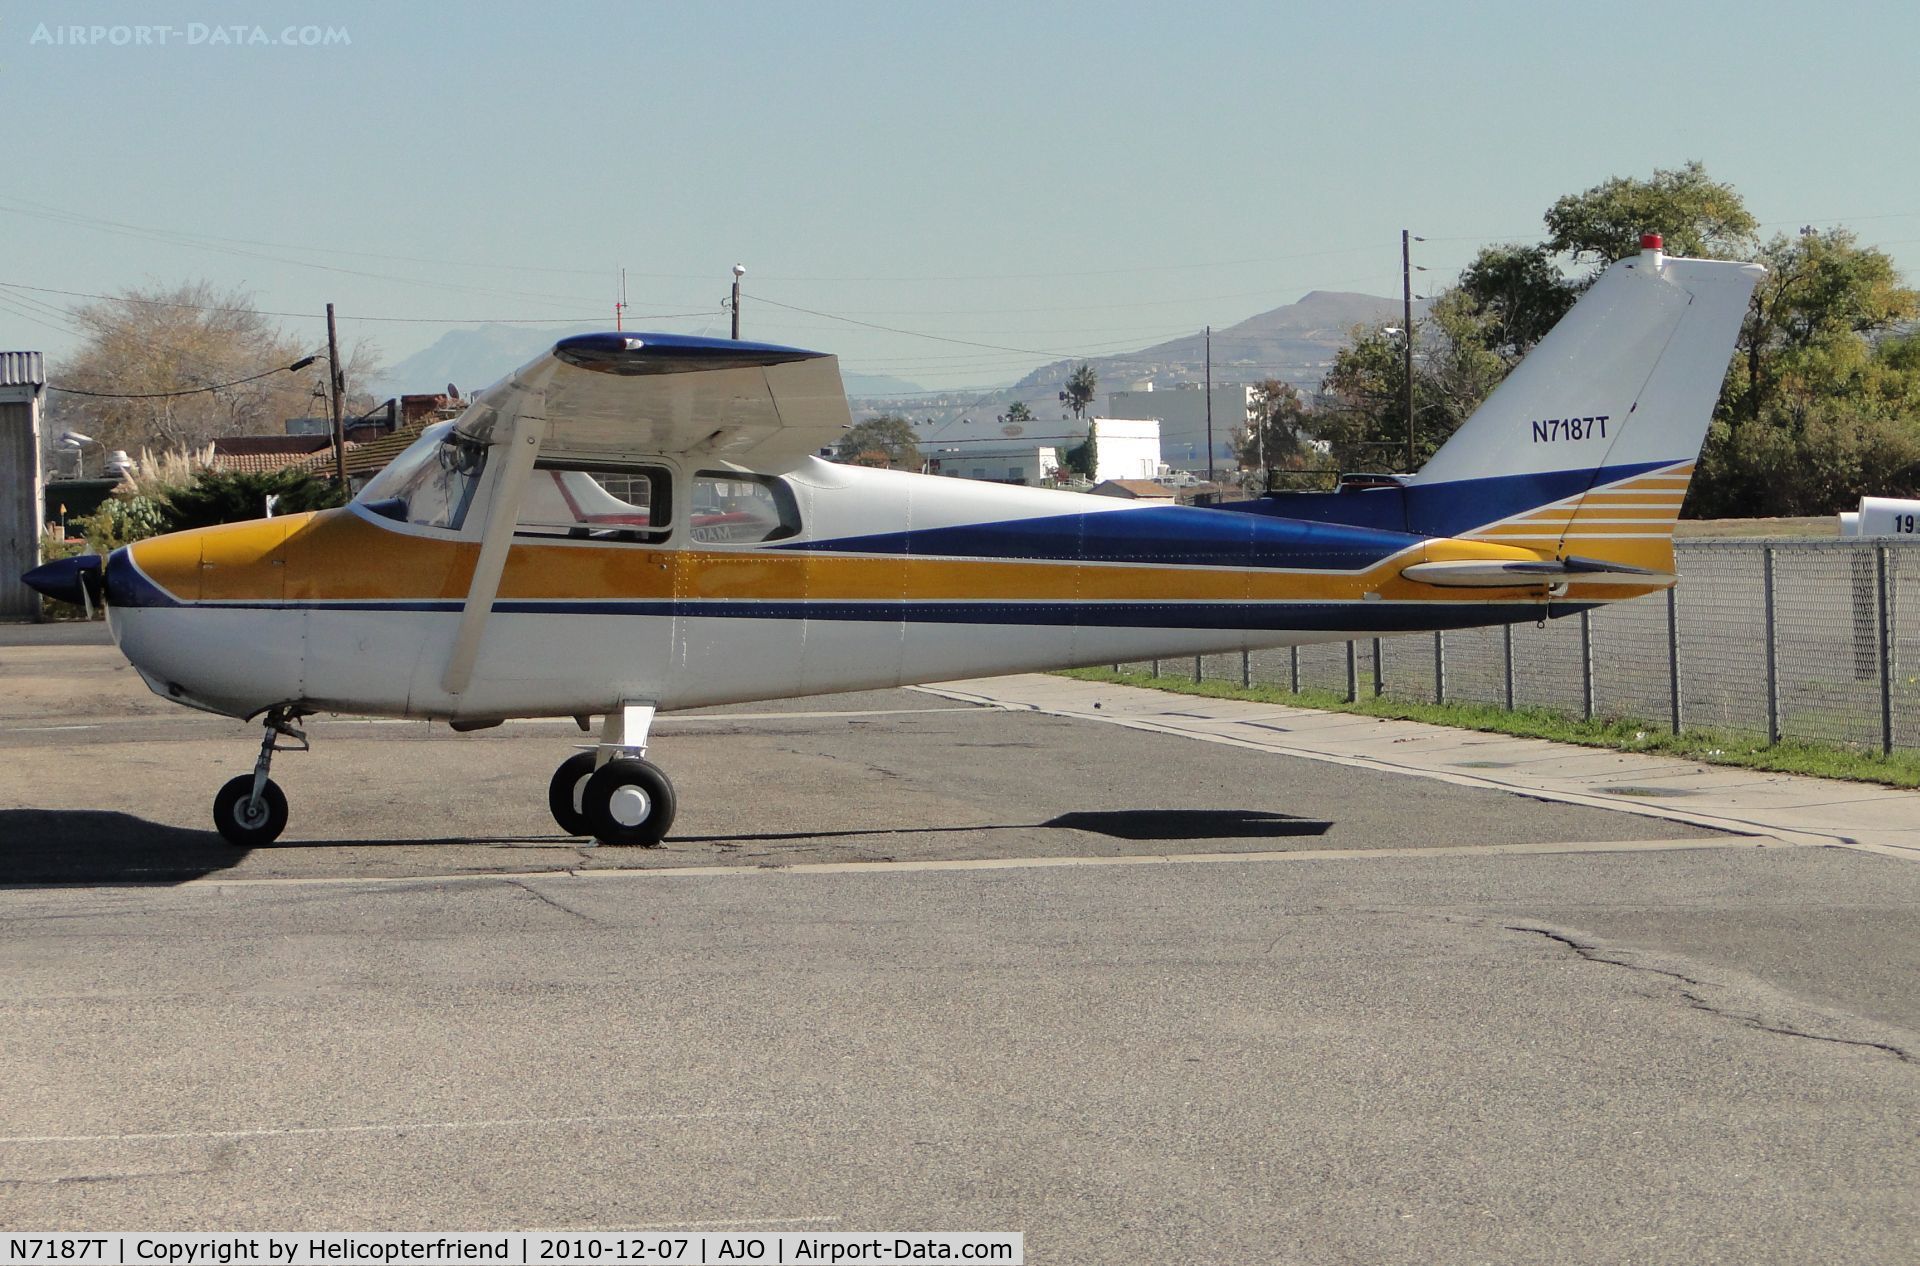 N7187T, 1959 Cessna 172A C/N 46787, Parked near the fence